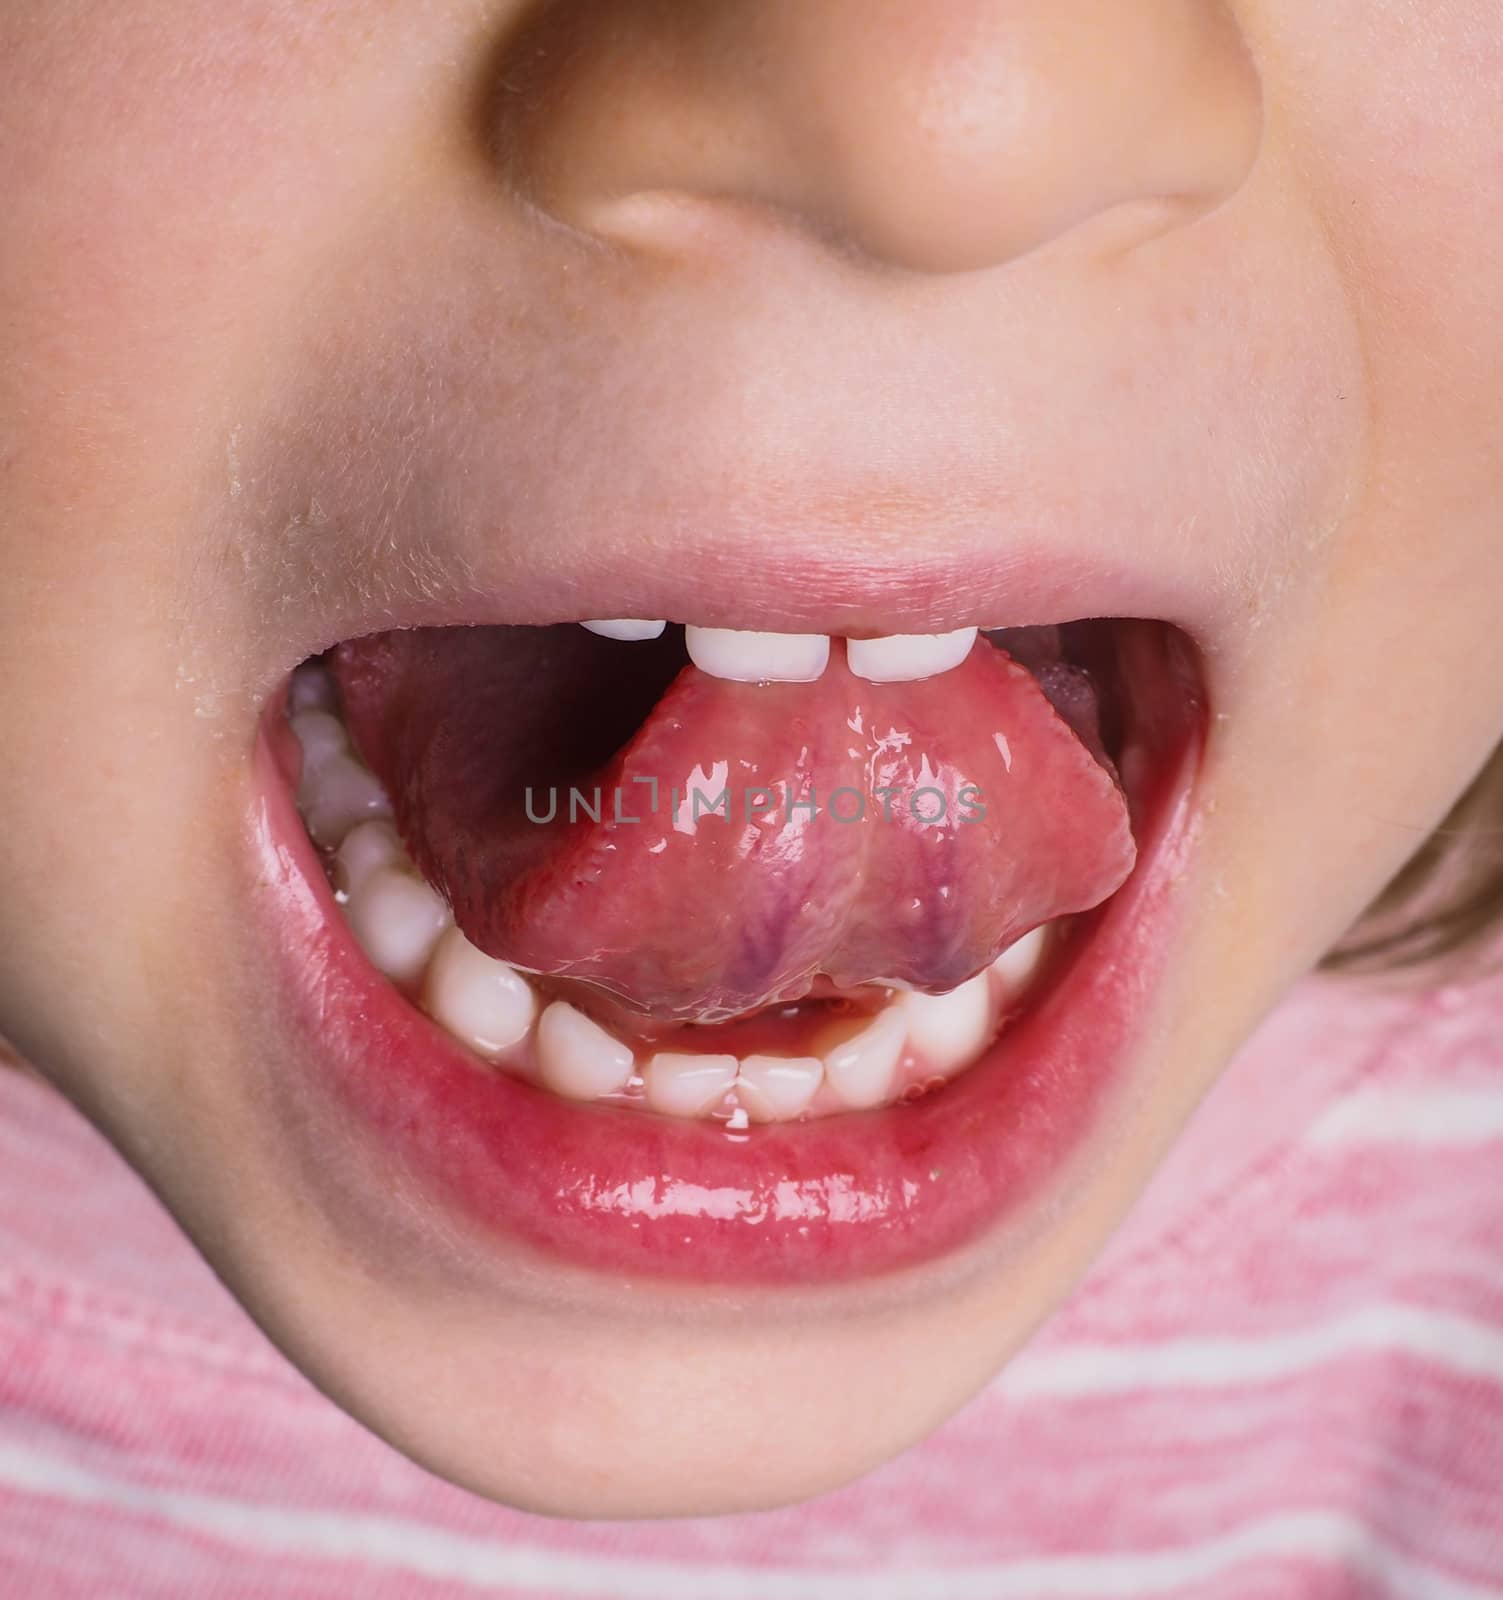 Little girl with pink shirt protruding tongue backwards with many white teeth